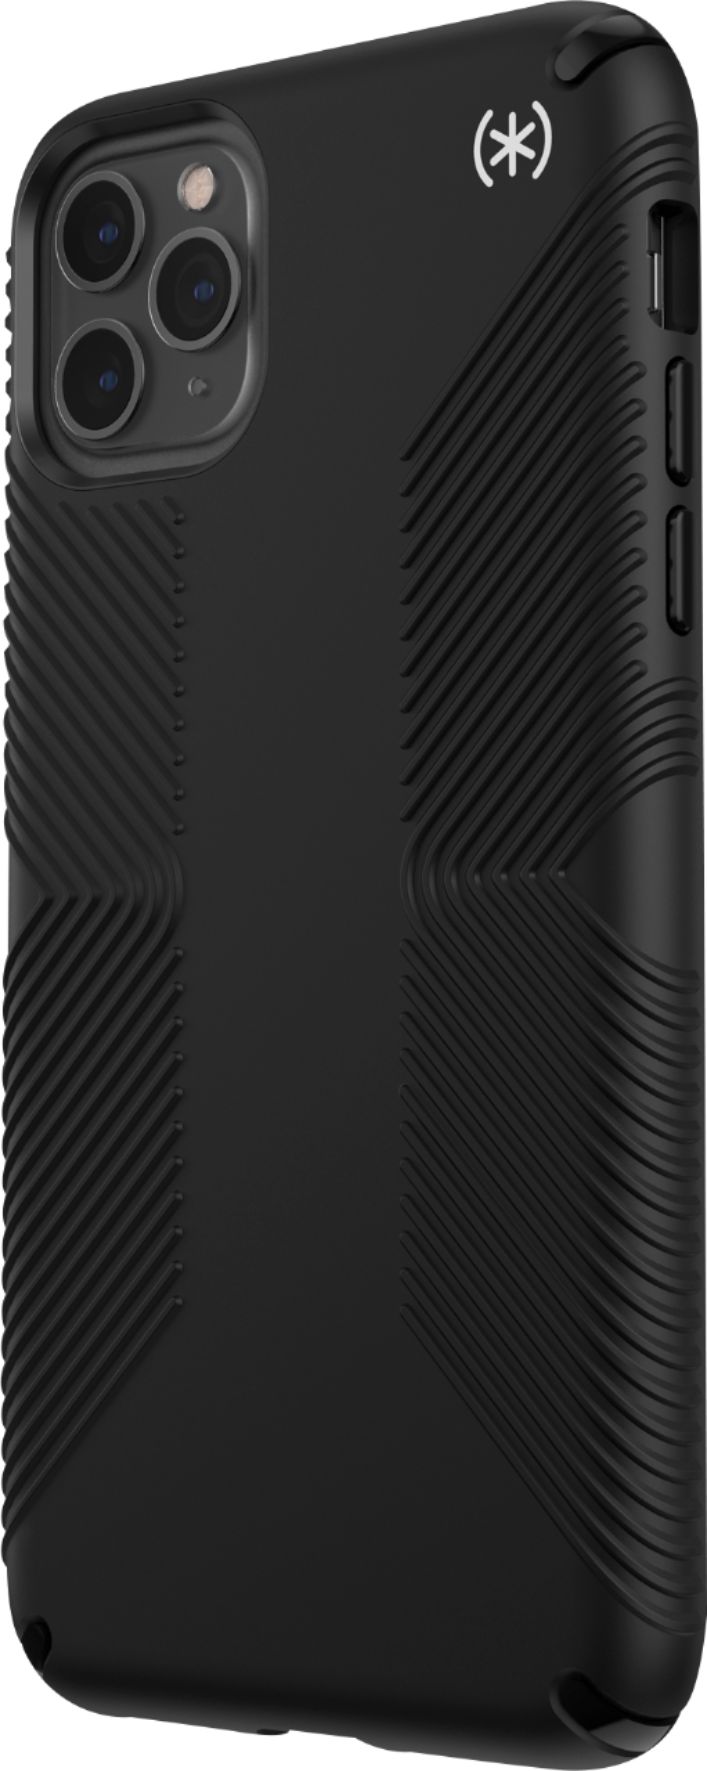 Left View: Apple - Geek Squad Certified Refurbished iPhone 11 Pro Max Smart Battery Case - Black